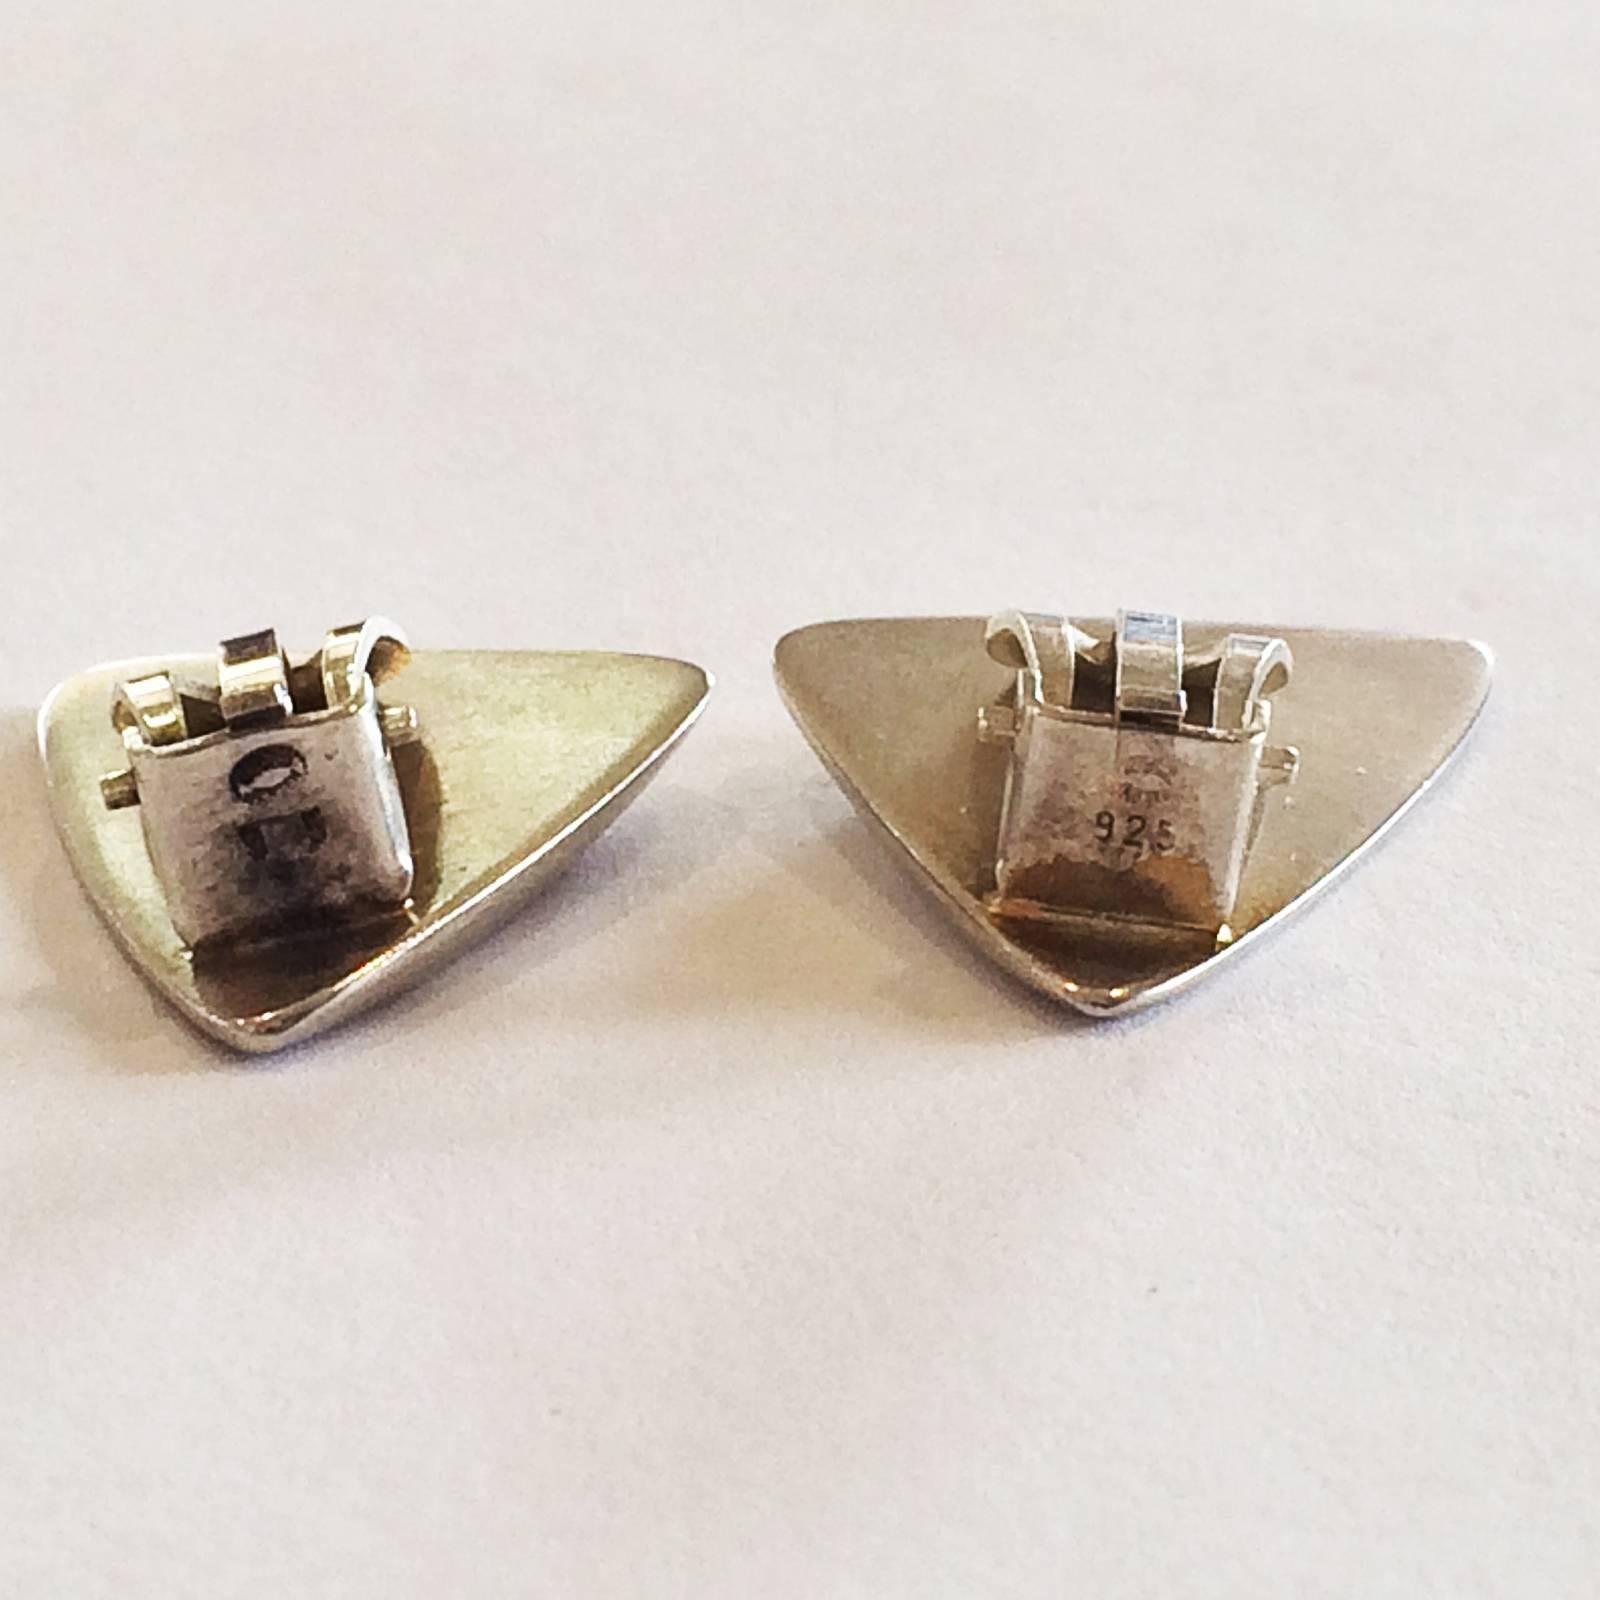 Earrings by Georg Jensen, designed by Bent Gabrielsen; an early, classic design, recognised as “The Triangles” or “Peak” Design. All in Sterling Silver and Hallmarked to the rear, “925”, being the European Sterling Mark, over the standard “Georg”